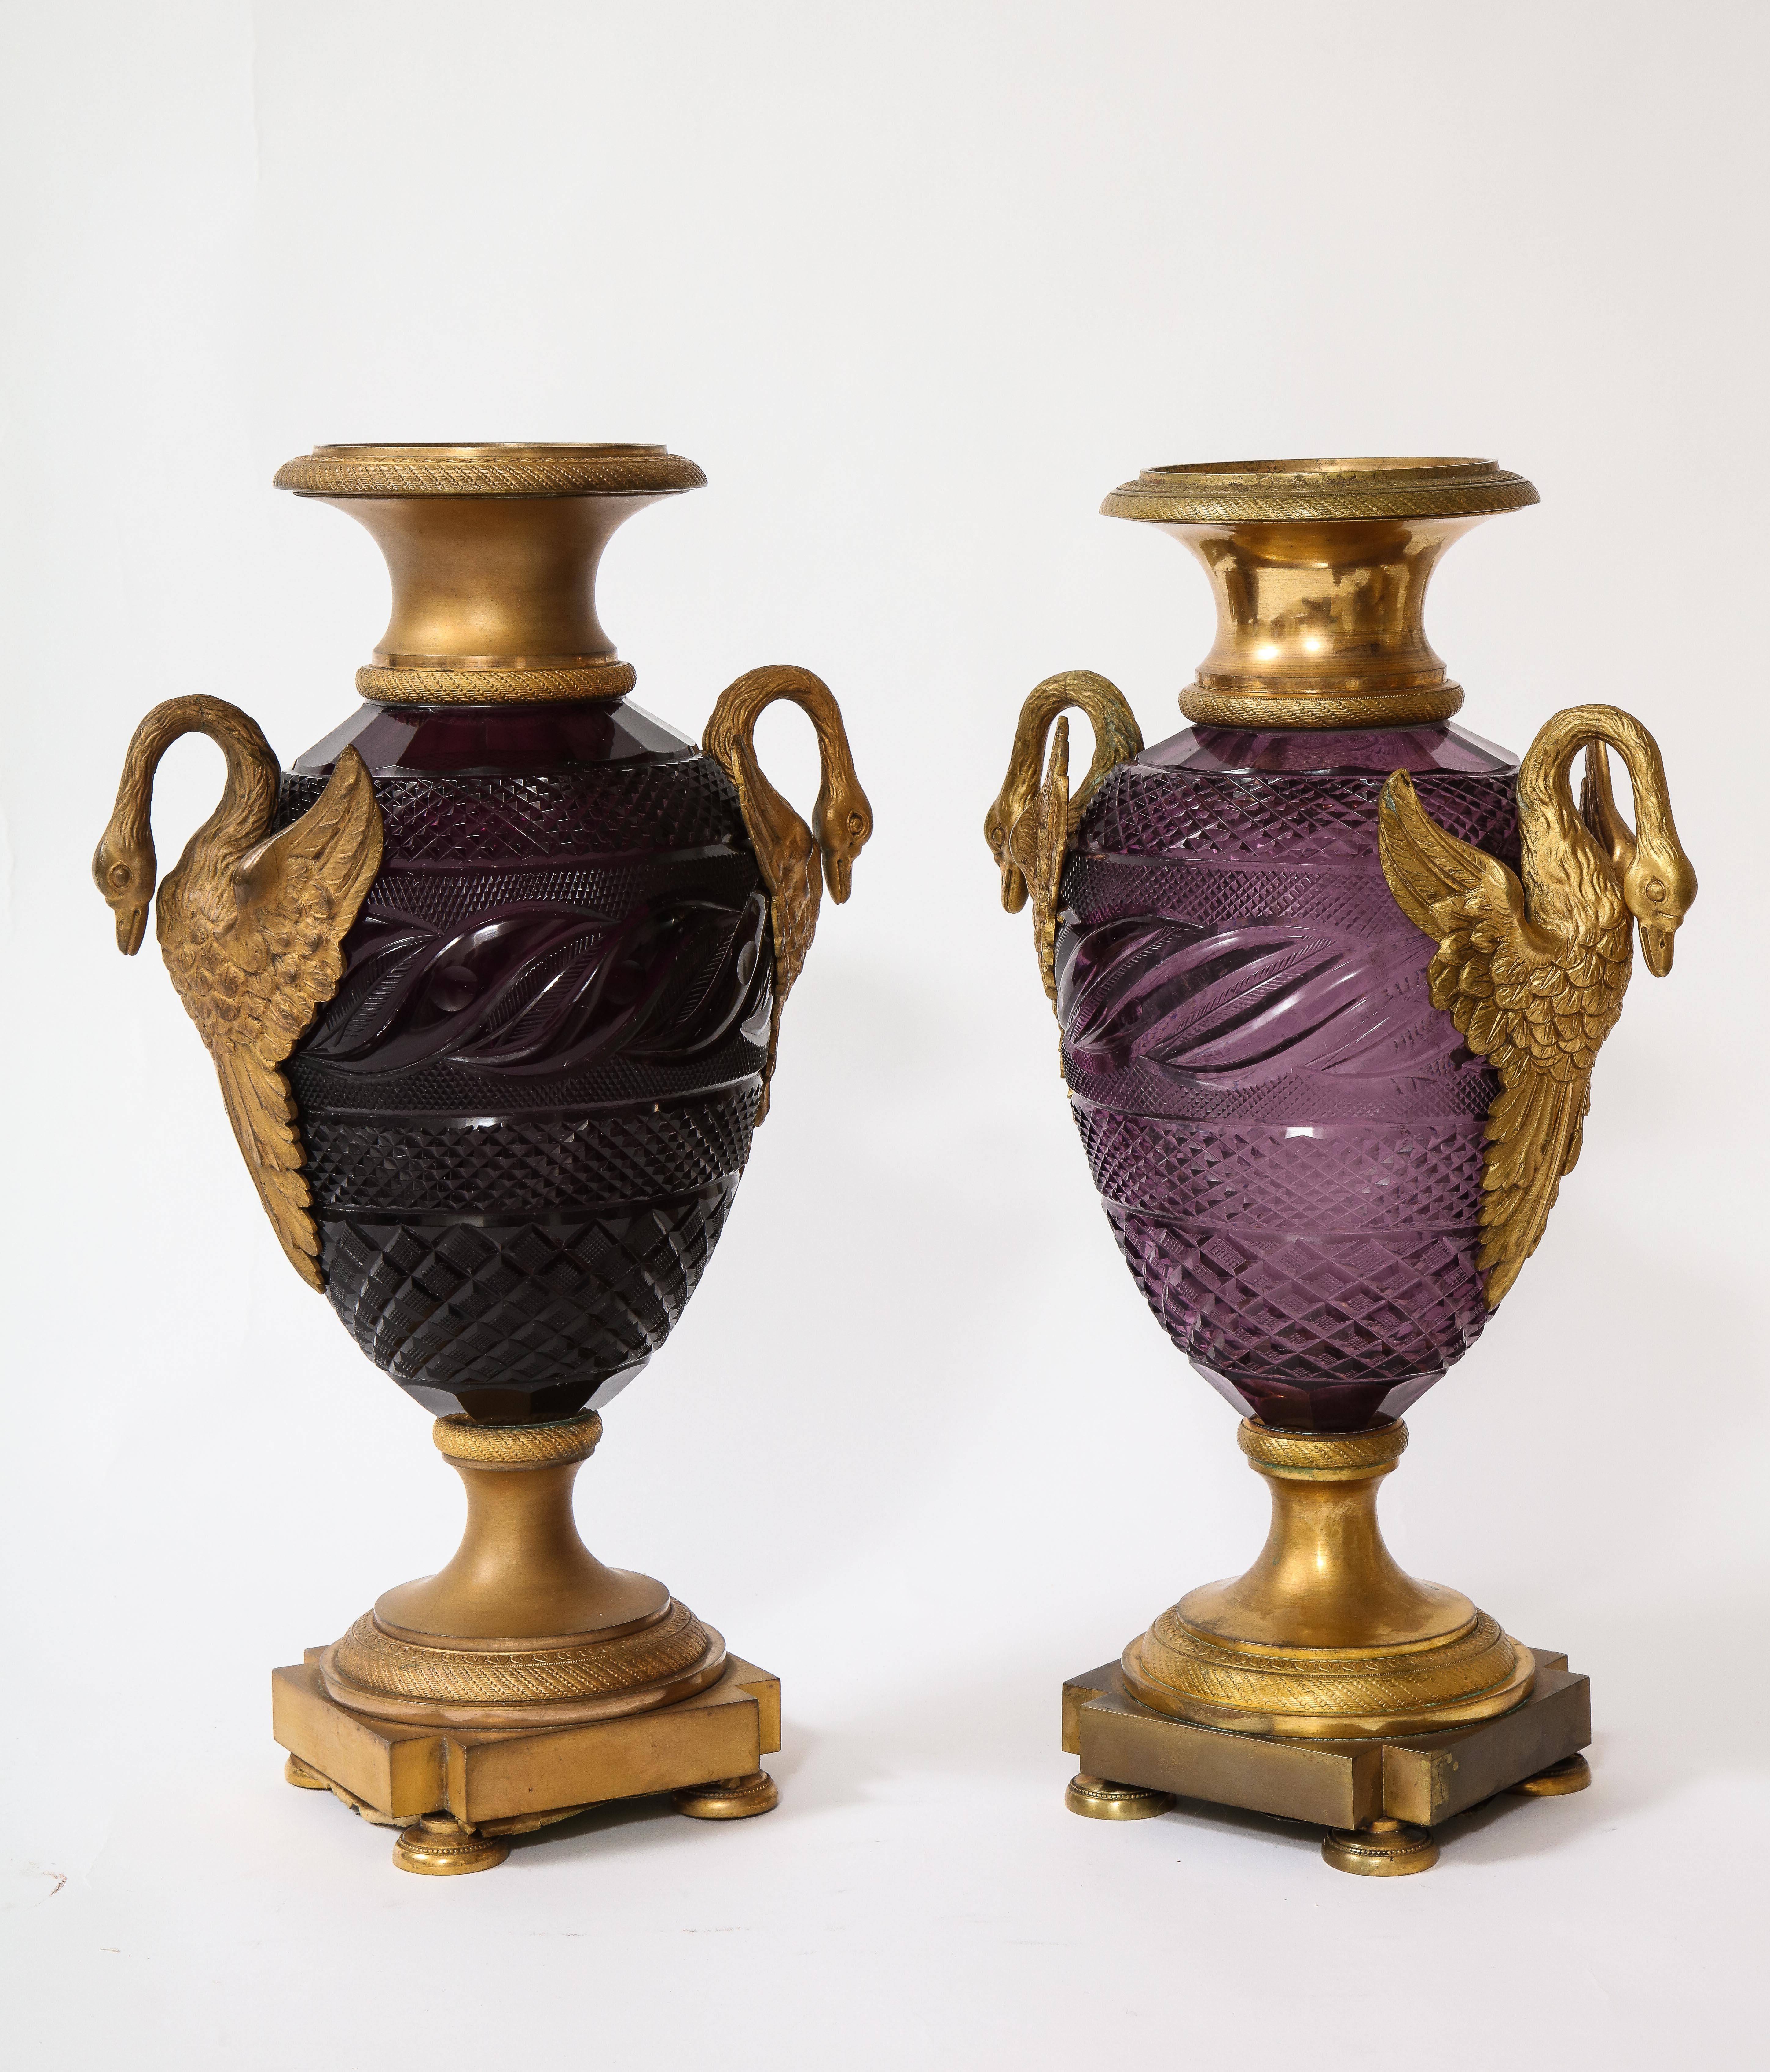 An exquisite pair of Russian Louis XVI style doré bronze mounted hand-diamond cut amethyst crystal double swan handle vases. The doré bronze swan handles are beautifully matted and burnished finished with hand-chiseled and hand-chased details to the